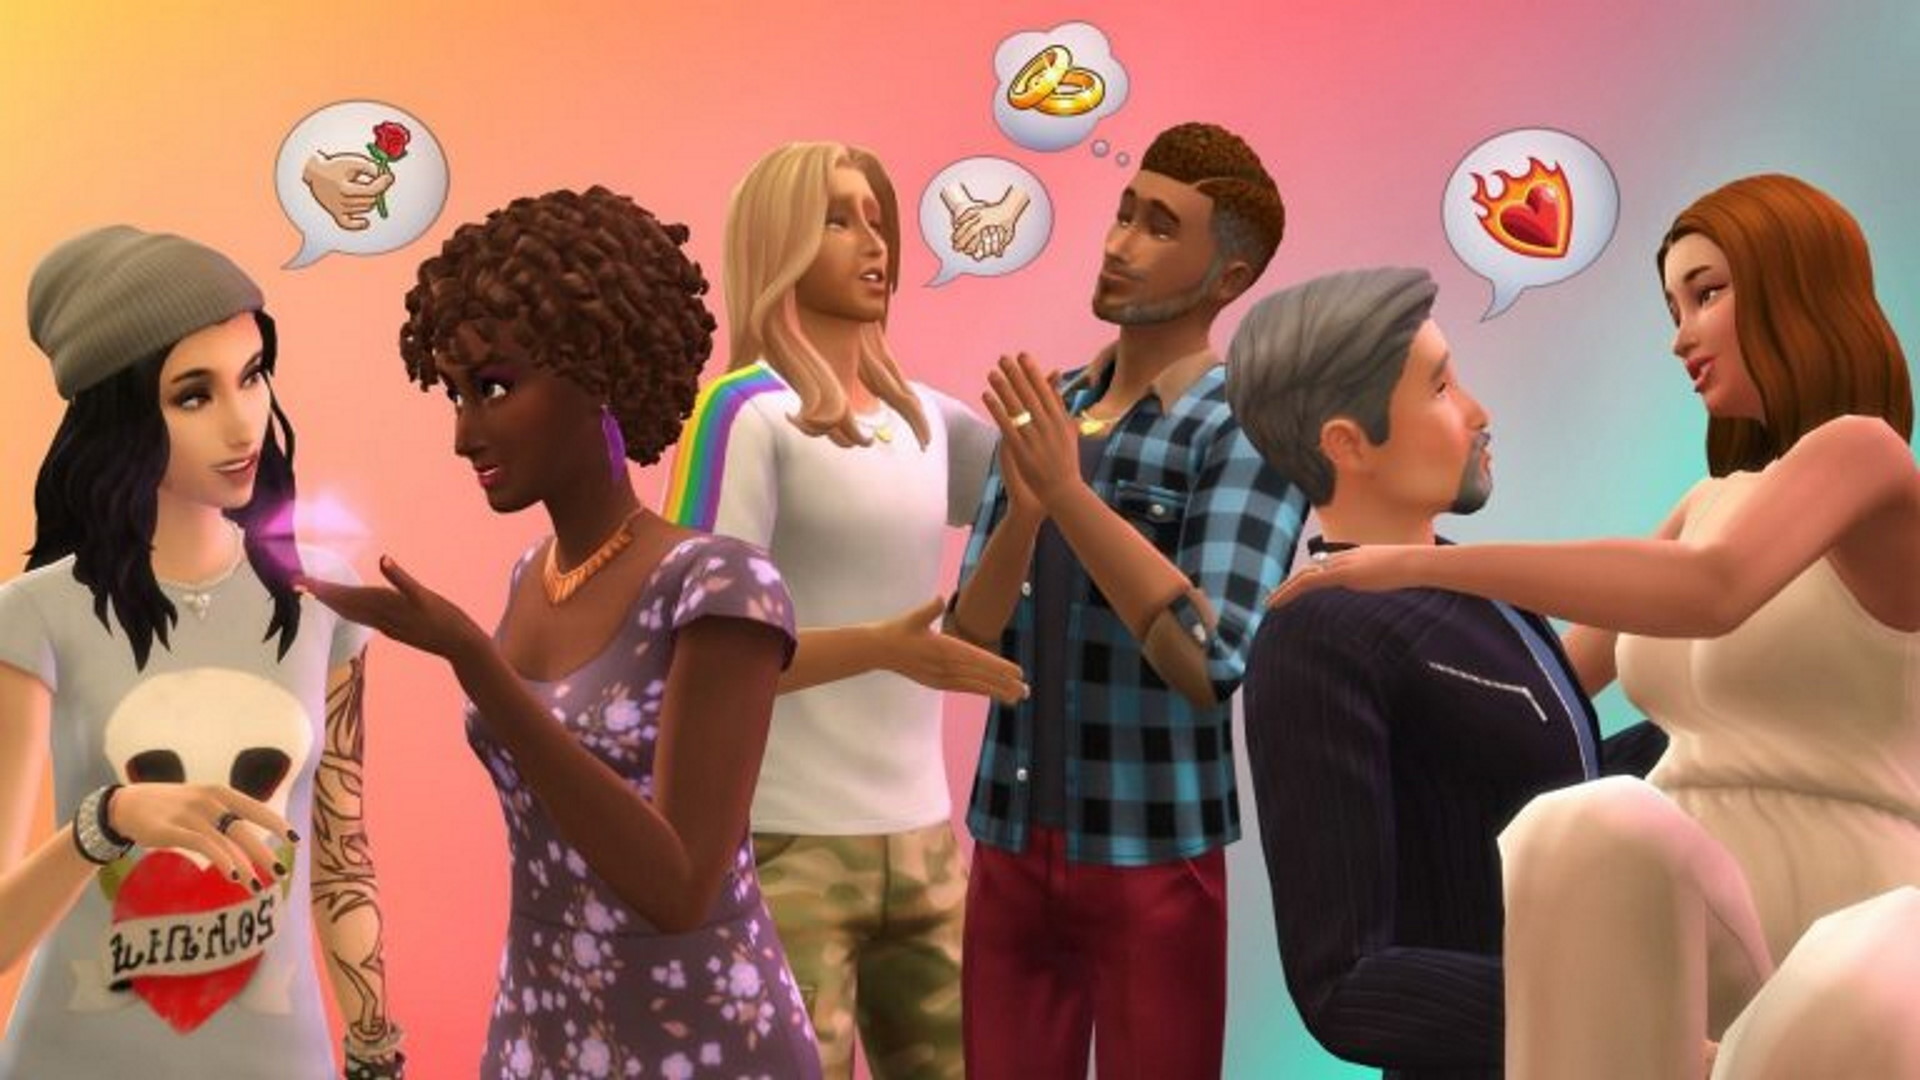  EA says LGBTQIA+ identities 'are a fact of life, not a toggle to be switched on and off' in The Sims 